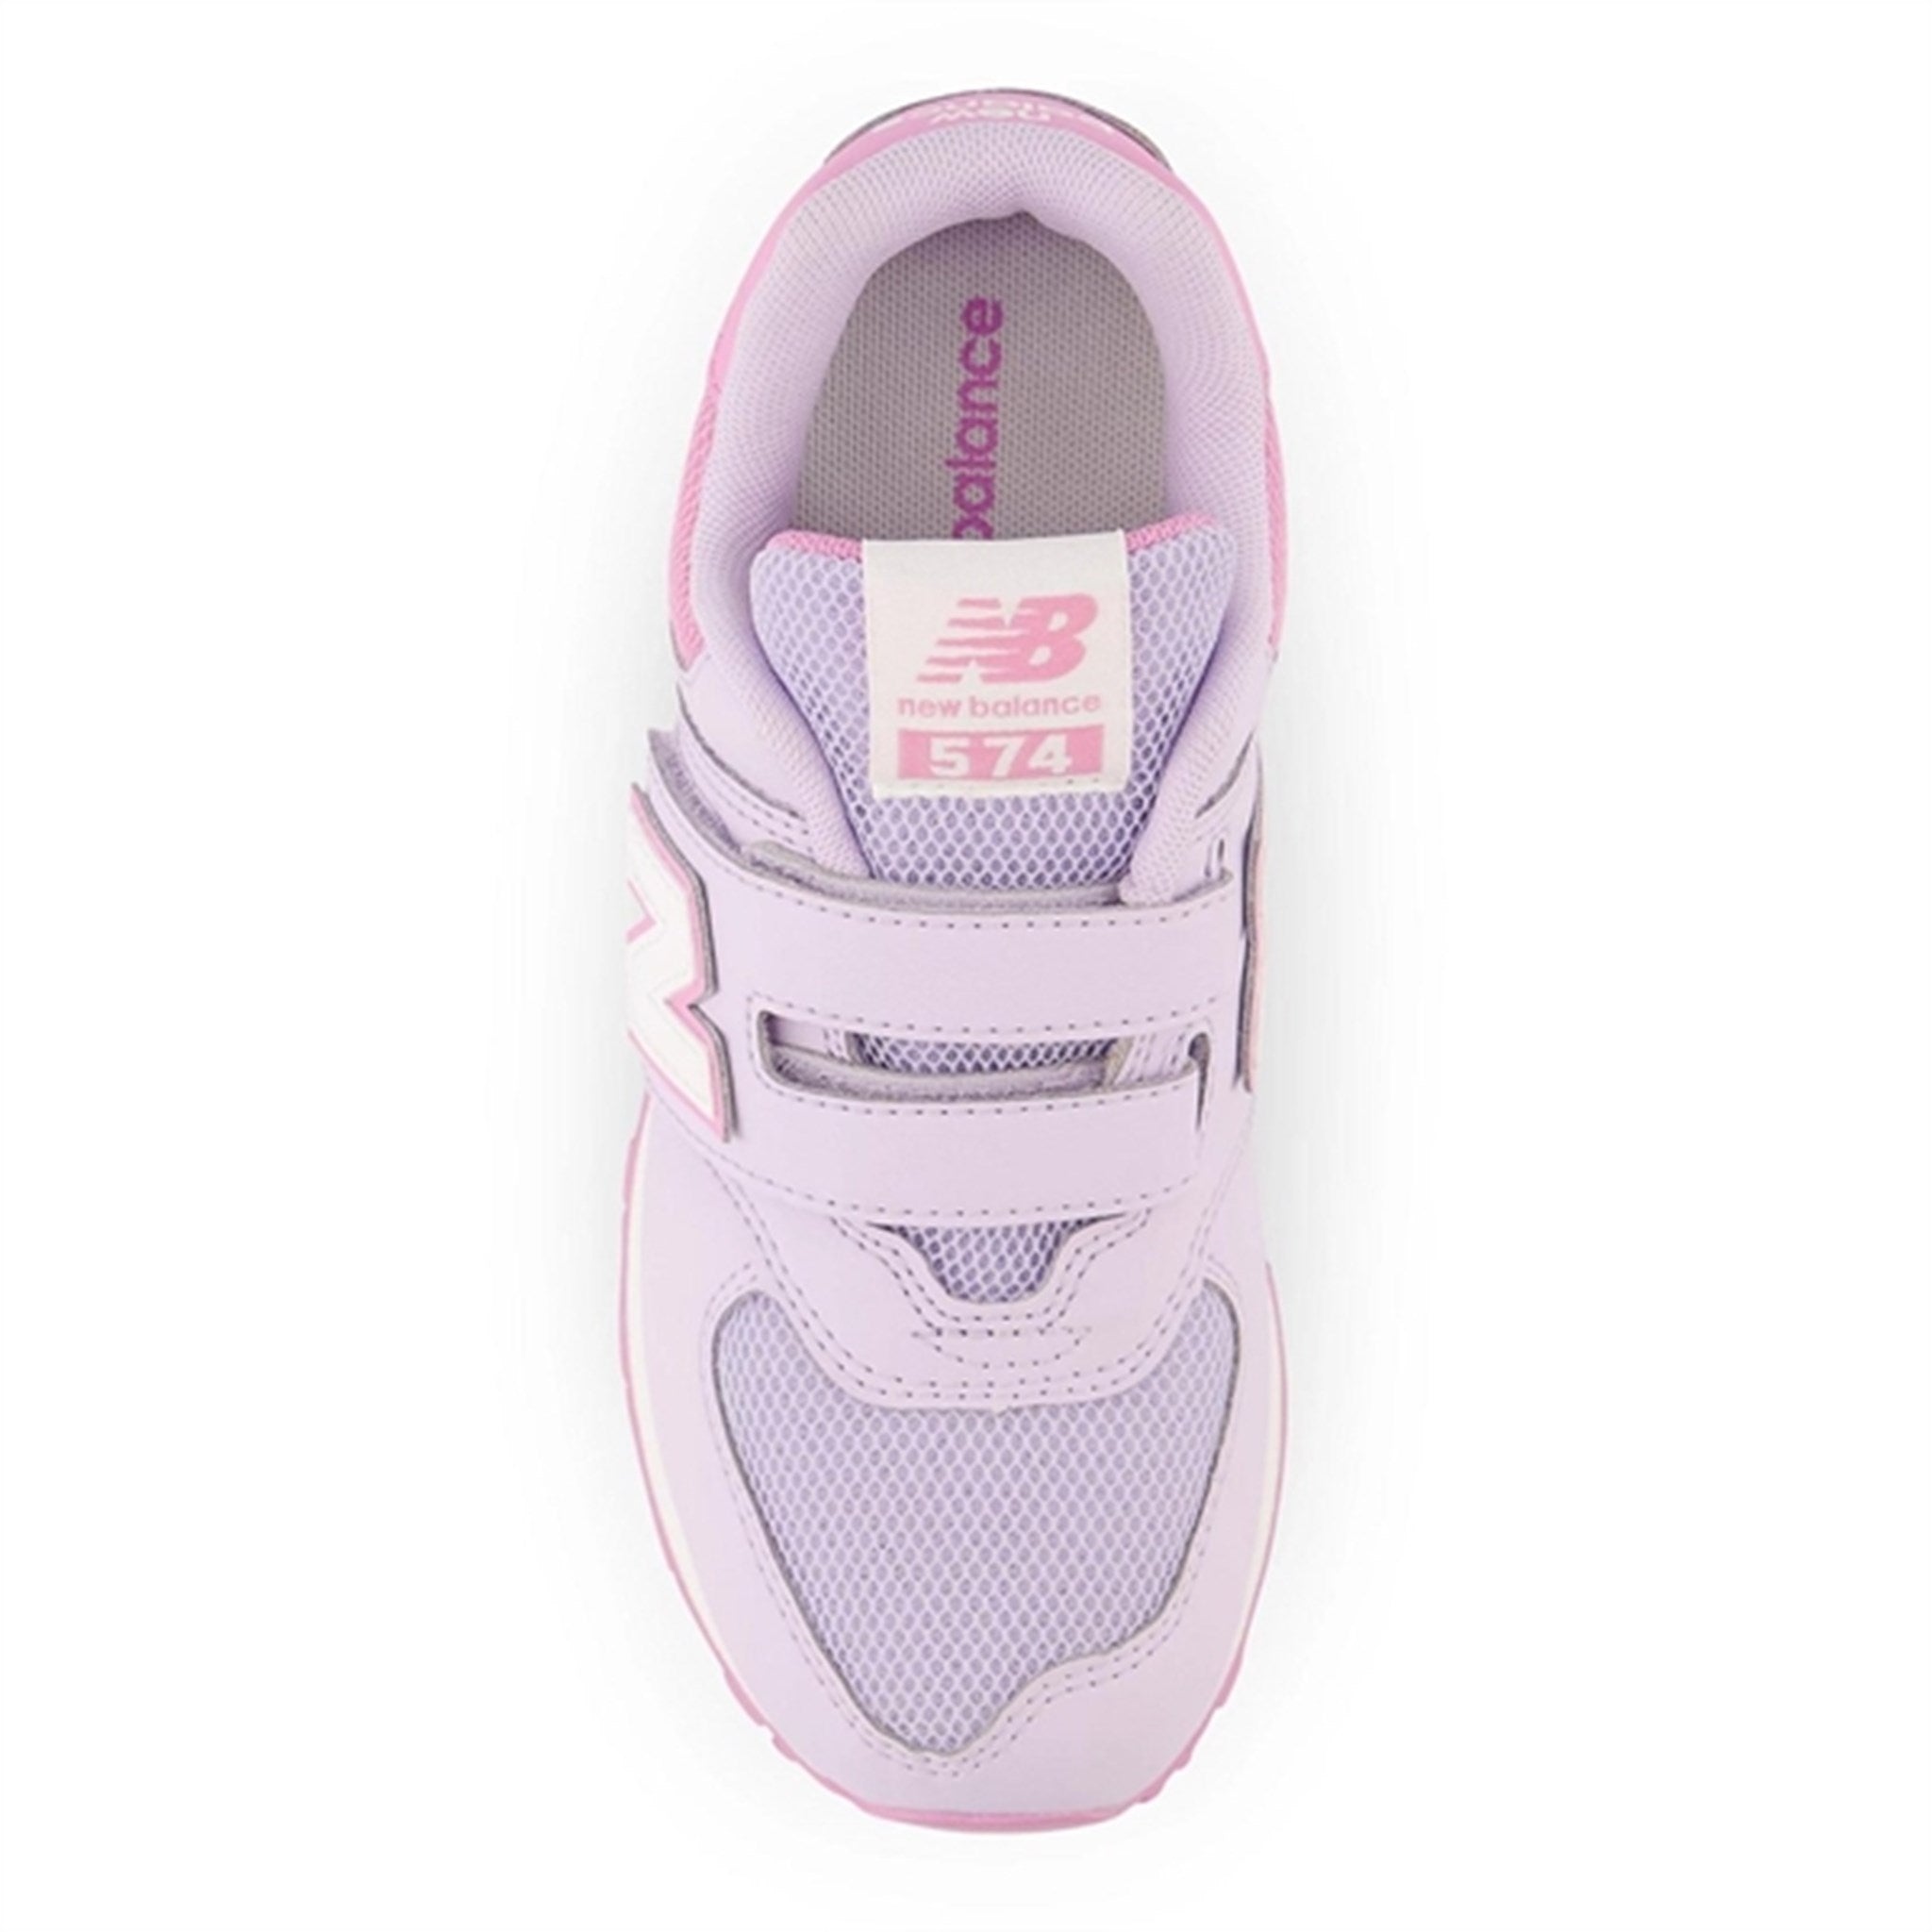 New Balance 574 Bright Lavender Sneakers 2